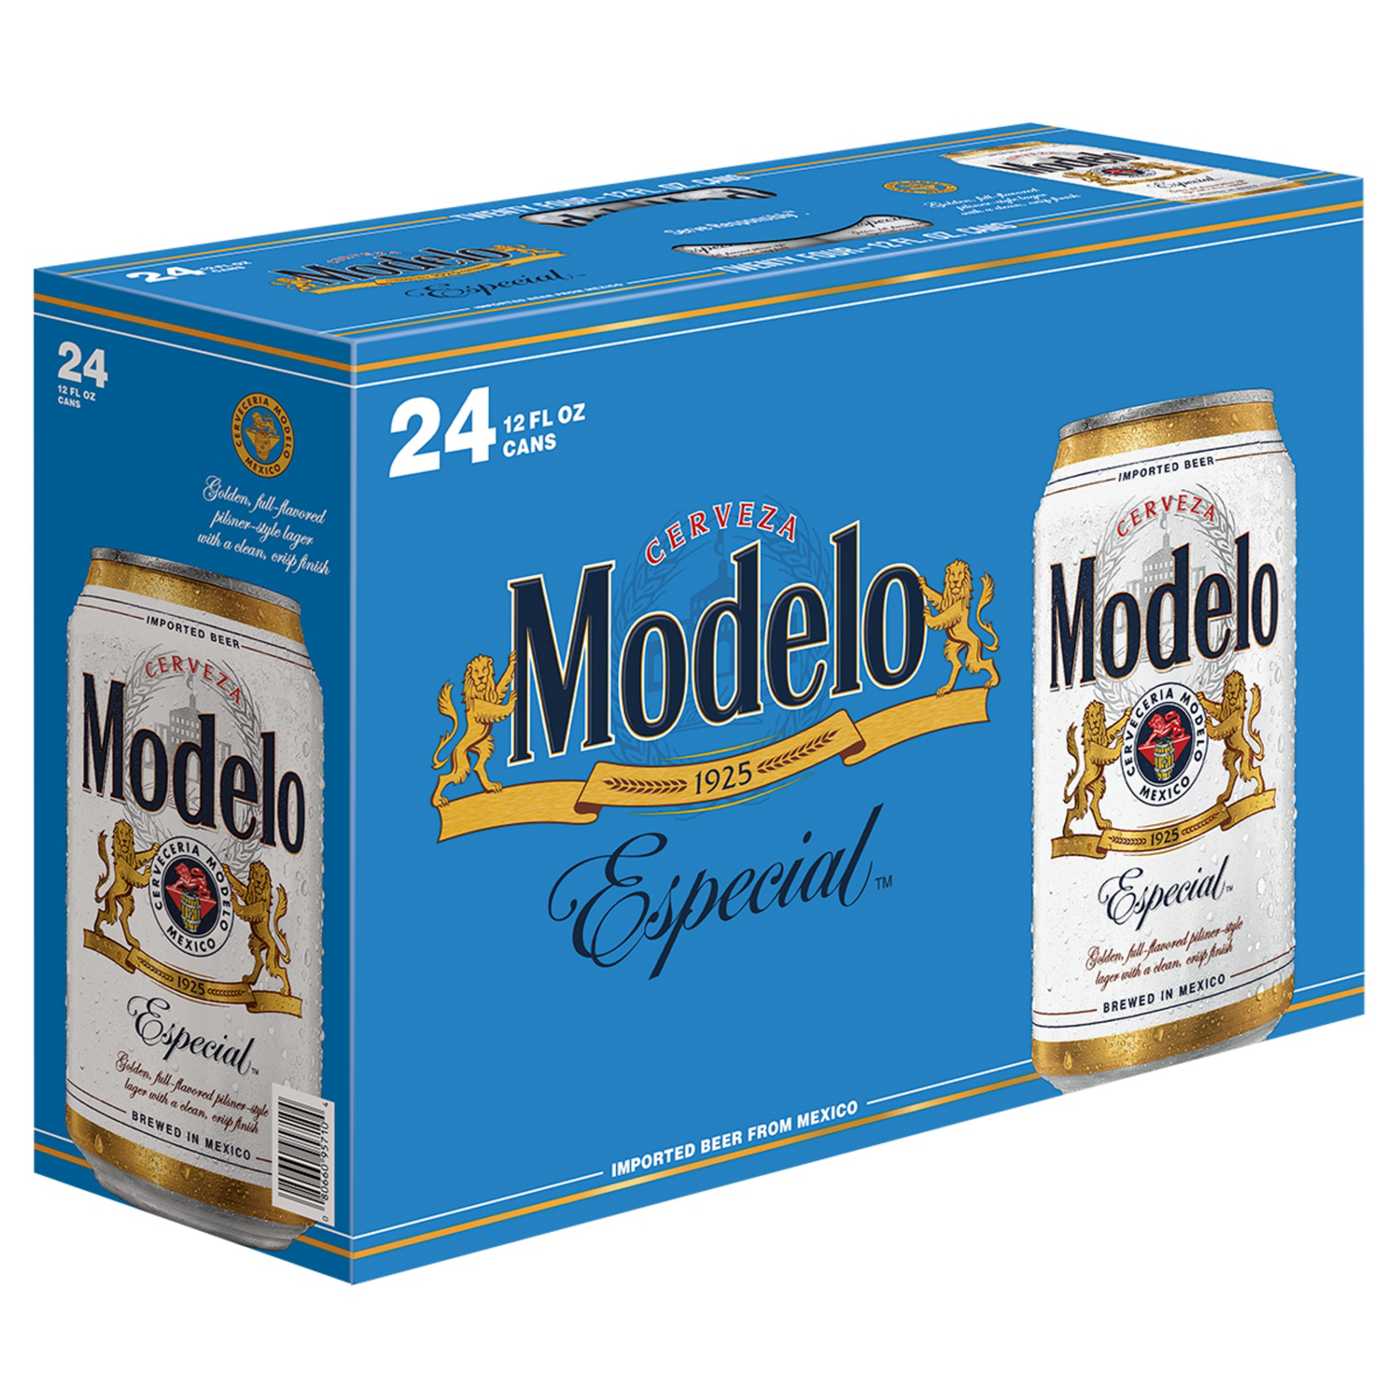 Modelo Especial Mexican Lager Import Beer 12 oz Cans, 24 pk; image 1 of 5